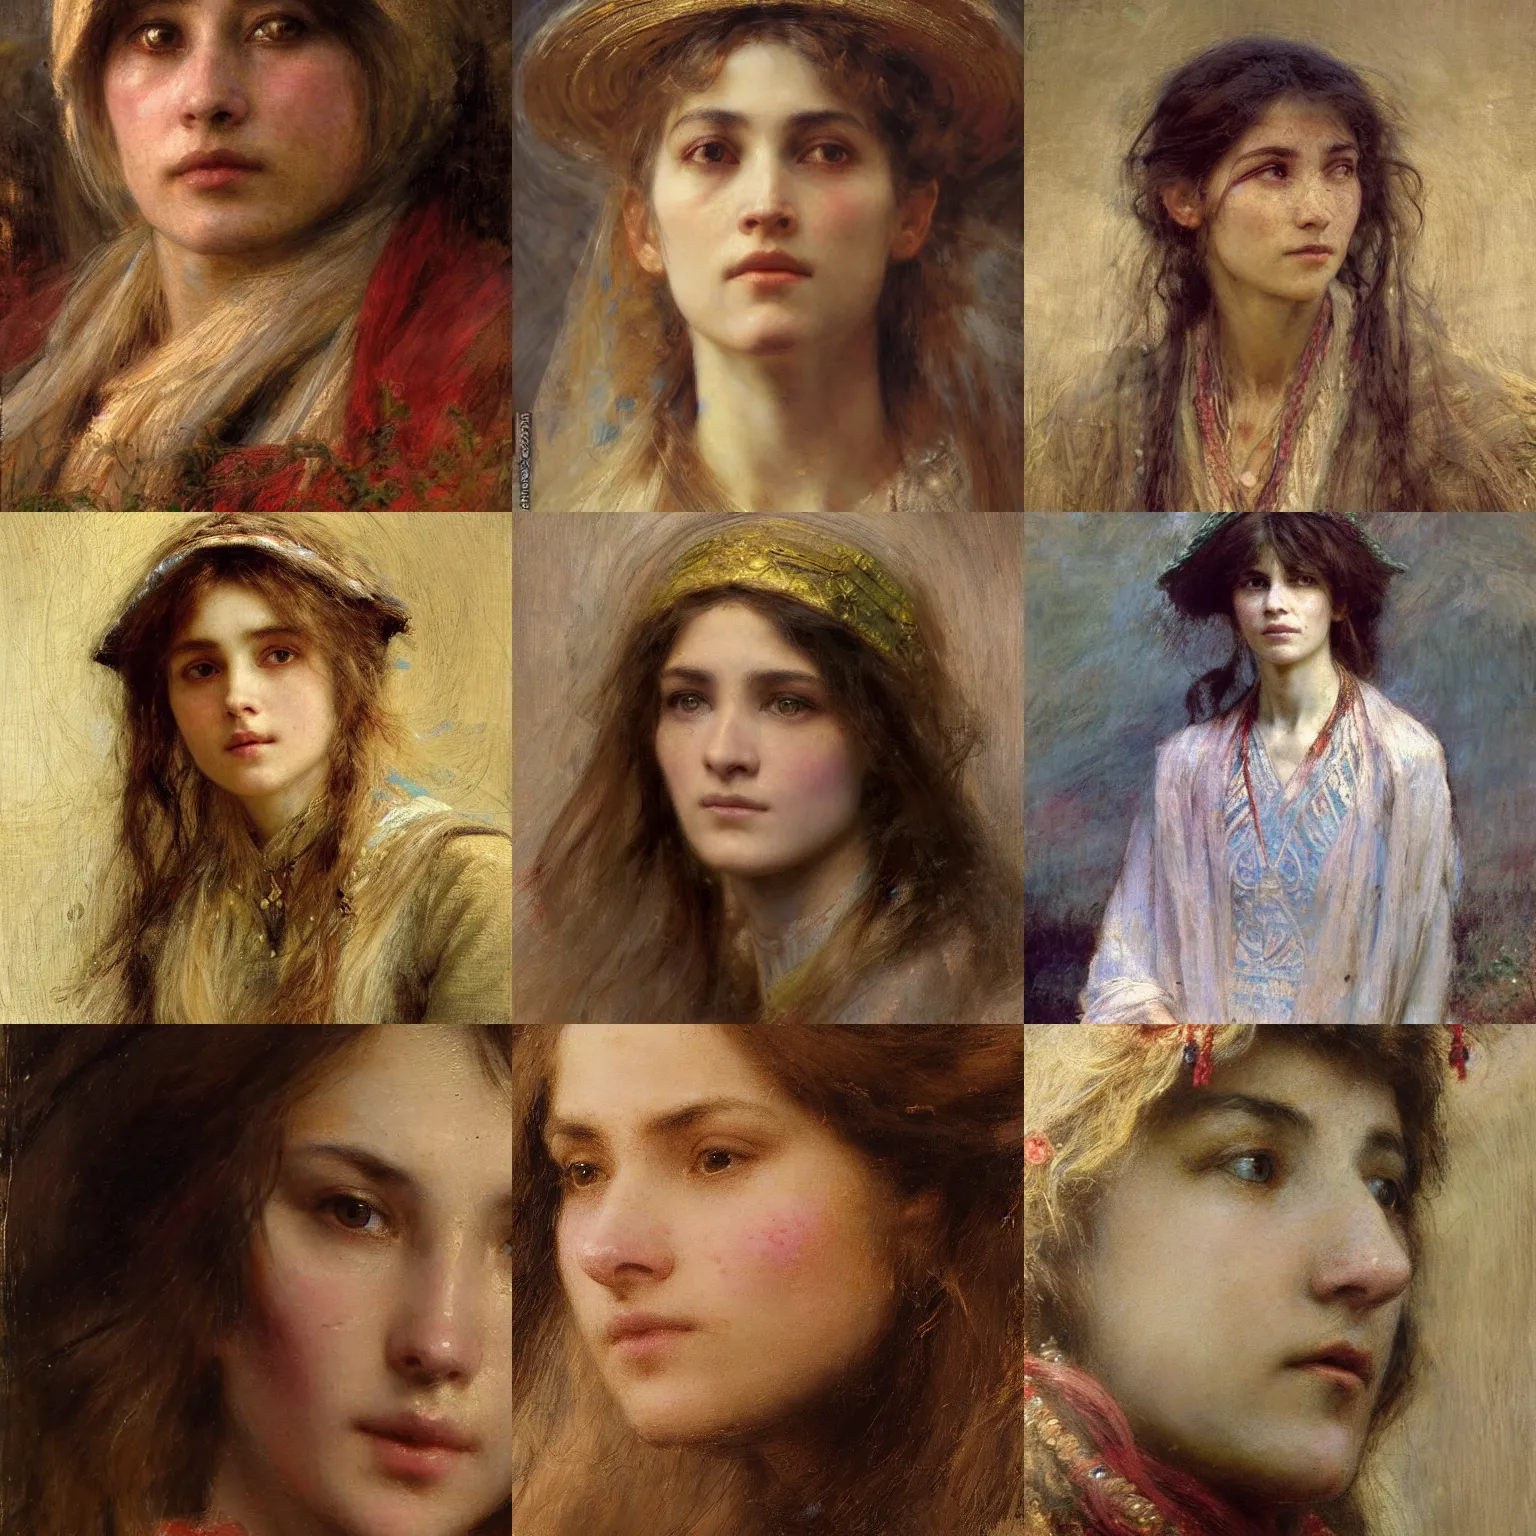 Prompt: female wizard orientalism face detail by nikolay makovsky and jules bastien - lepage and annie swynnerton and thomas lawrence, masterful intricate artwork, excellent lighting, high detail 8 k